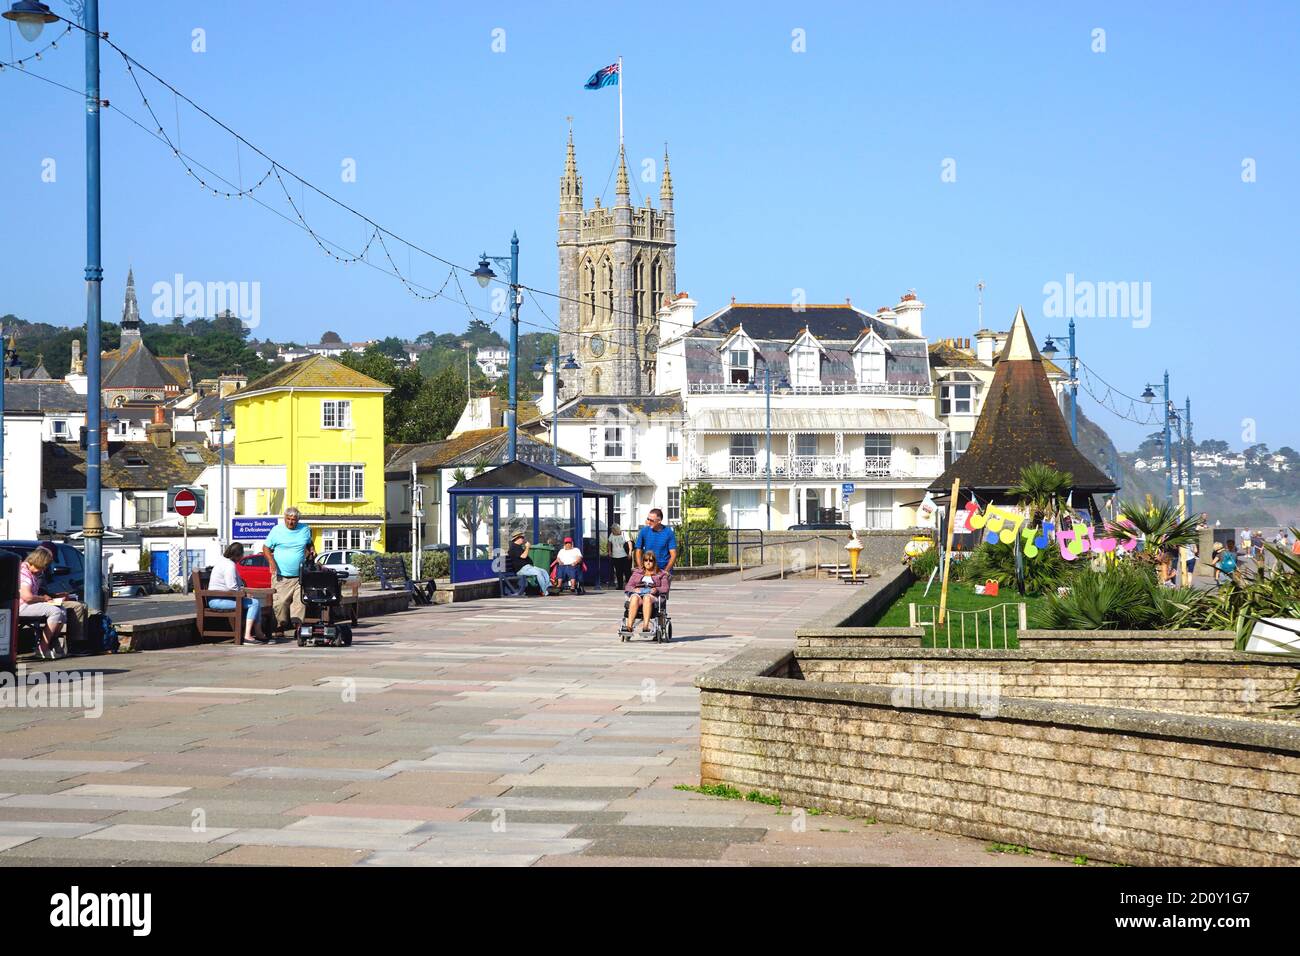 Teignmouth, Devon, UK. September 17, 2020. holidaymakers and locals enjoying the Den Promenade at Teignmouth in Devon, UK. Stock Photo